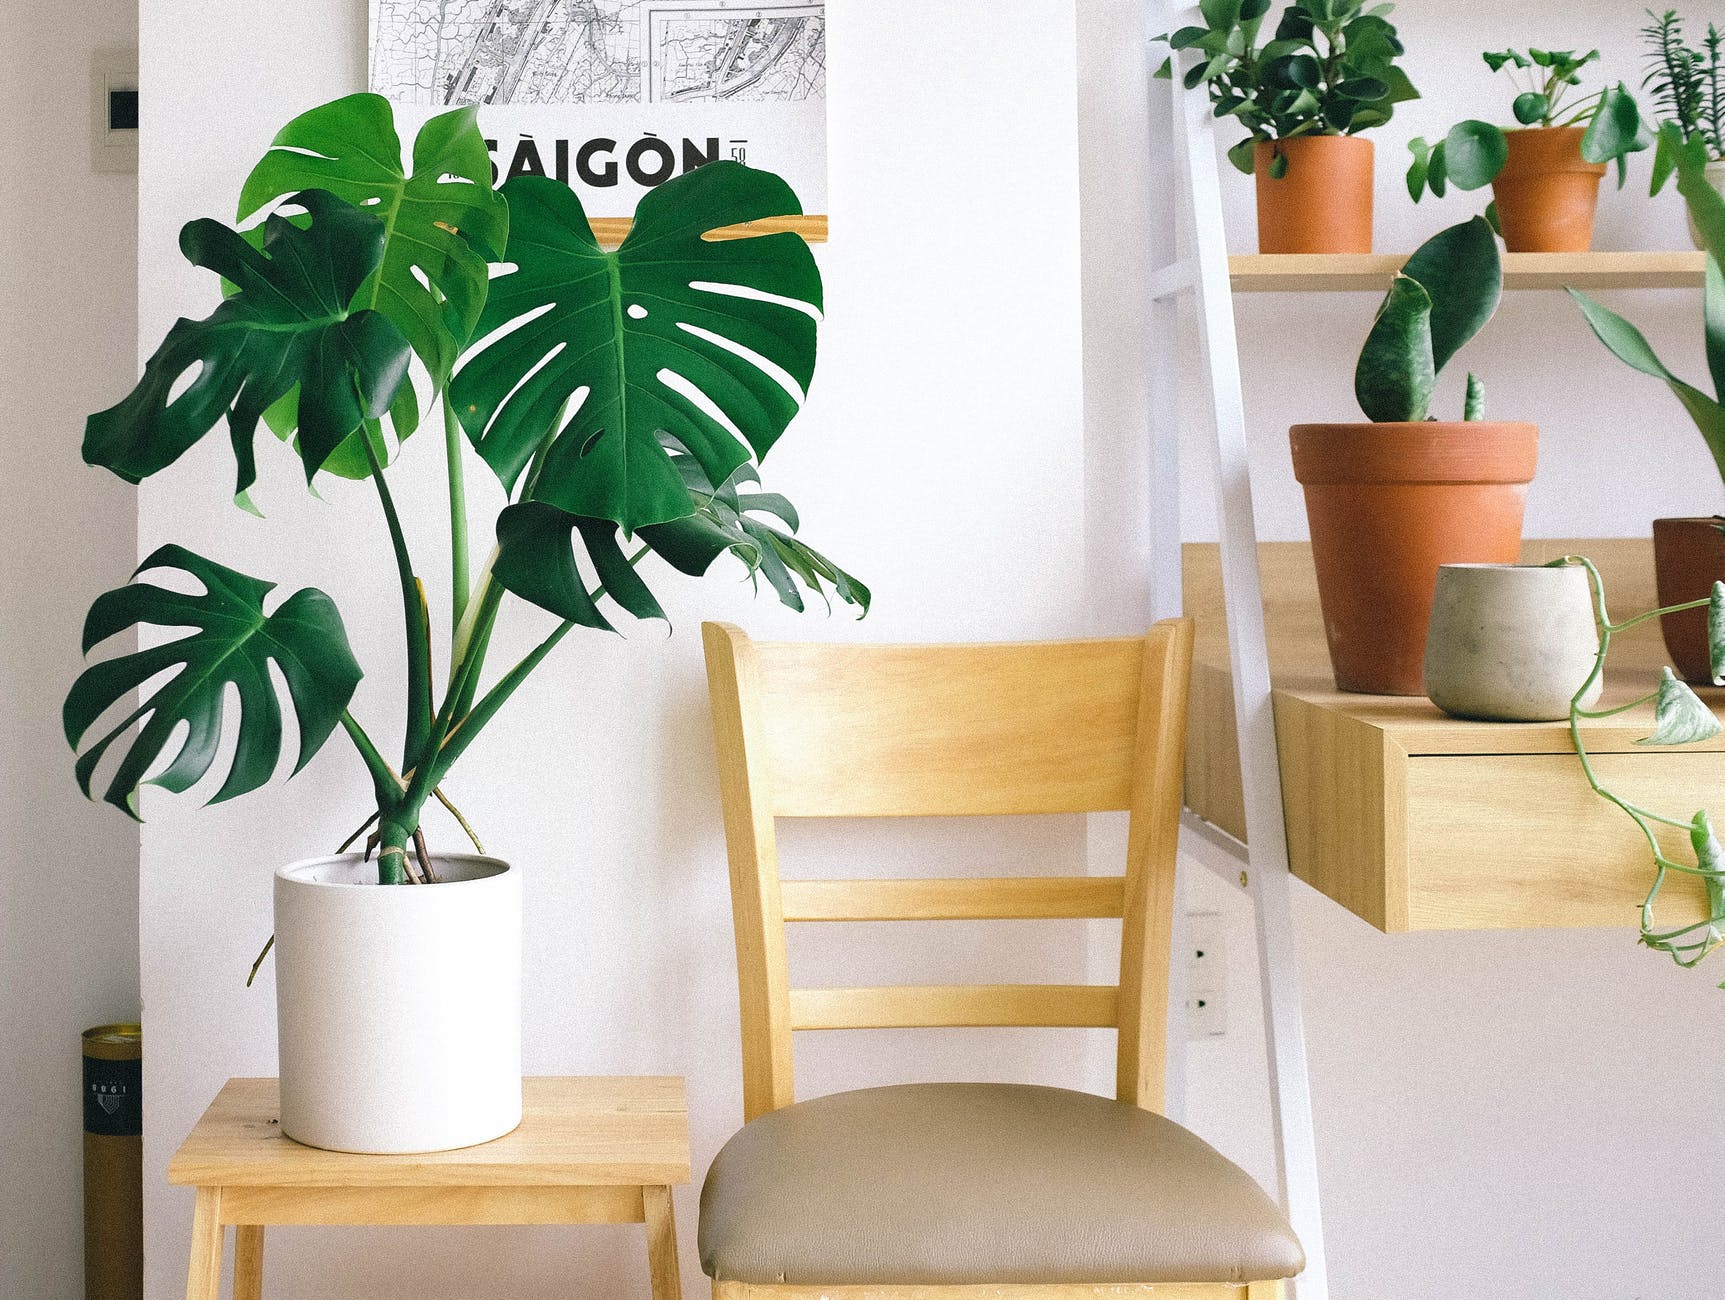 Make Your Rental Space Your Own With These Simple Decorating Tips